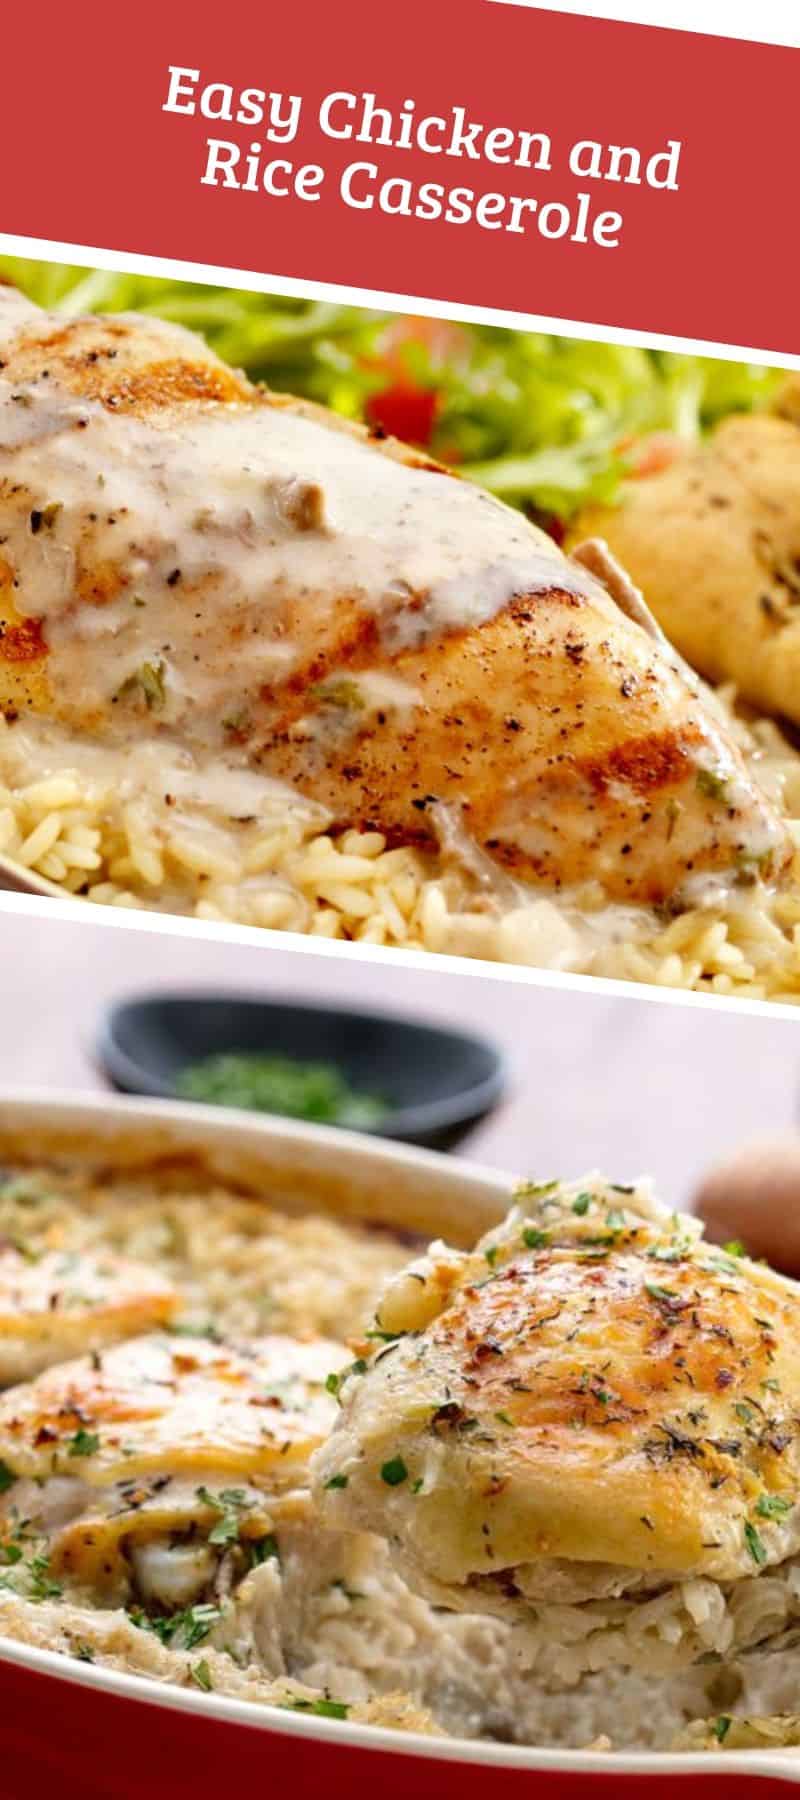 Easy Chicken and Rice Casserole 2